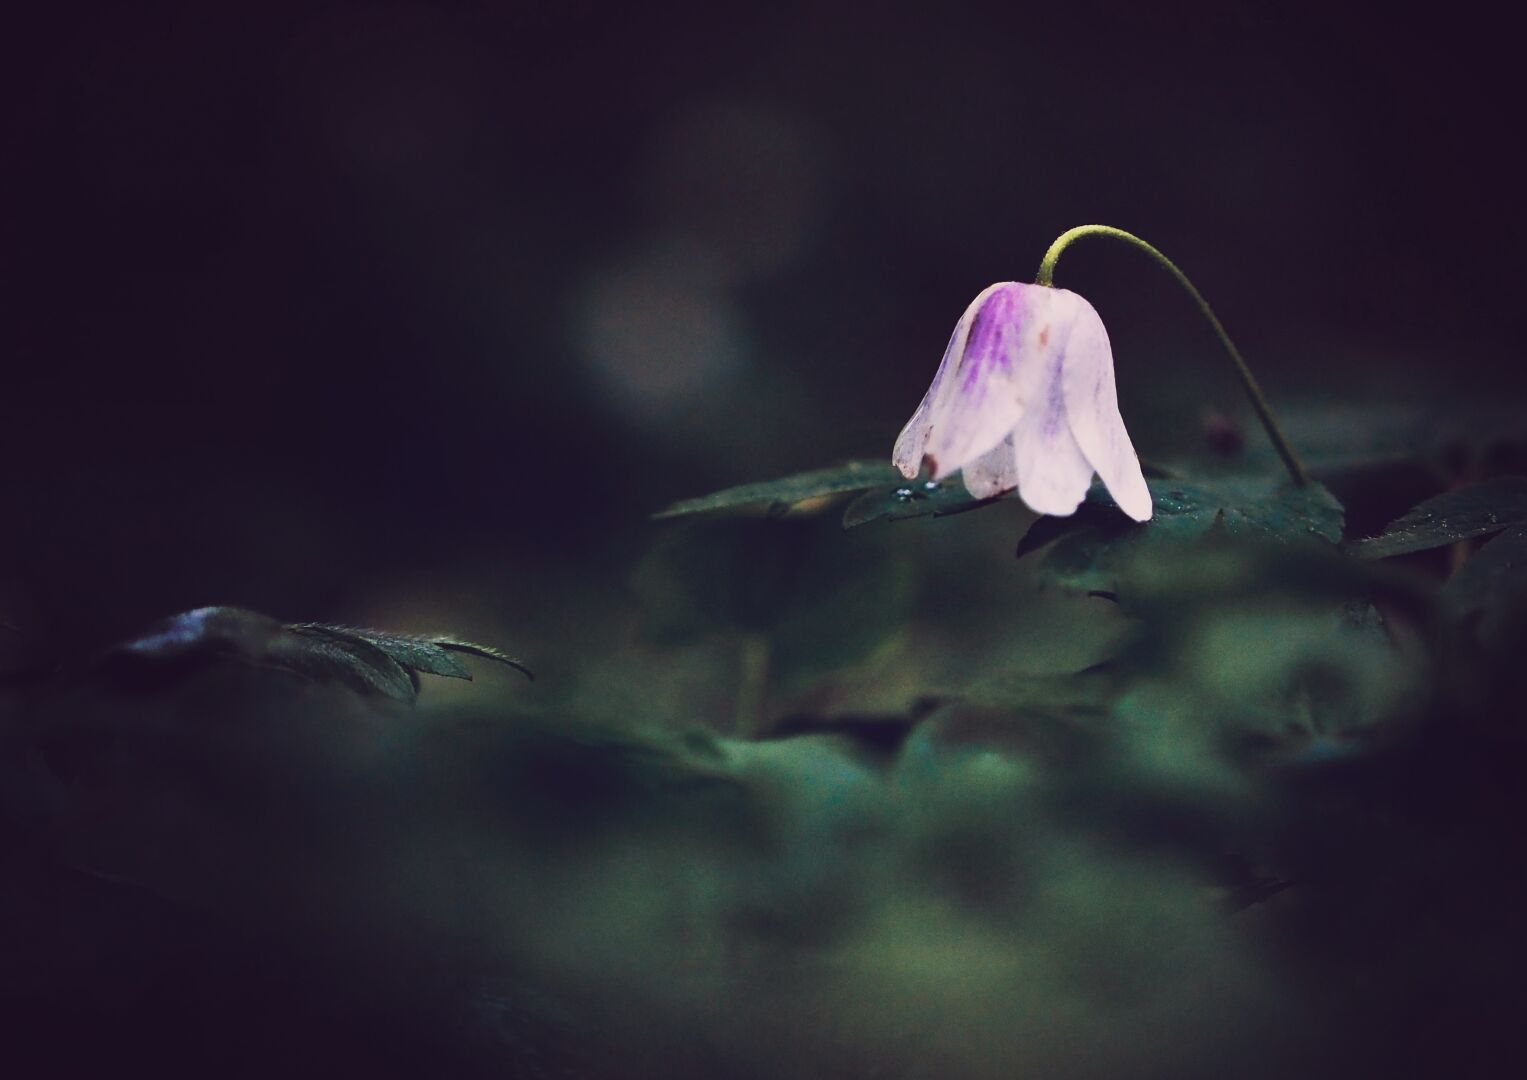 Shy in the shade of the forest: a solitary wood anemone.

#blooming #bloomscrolling #flower #spring #wood #photography